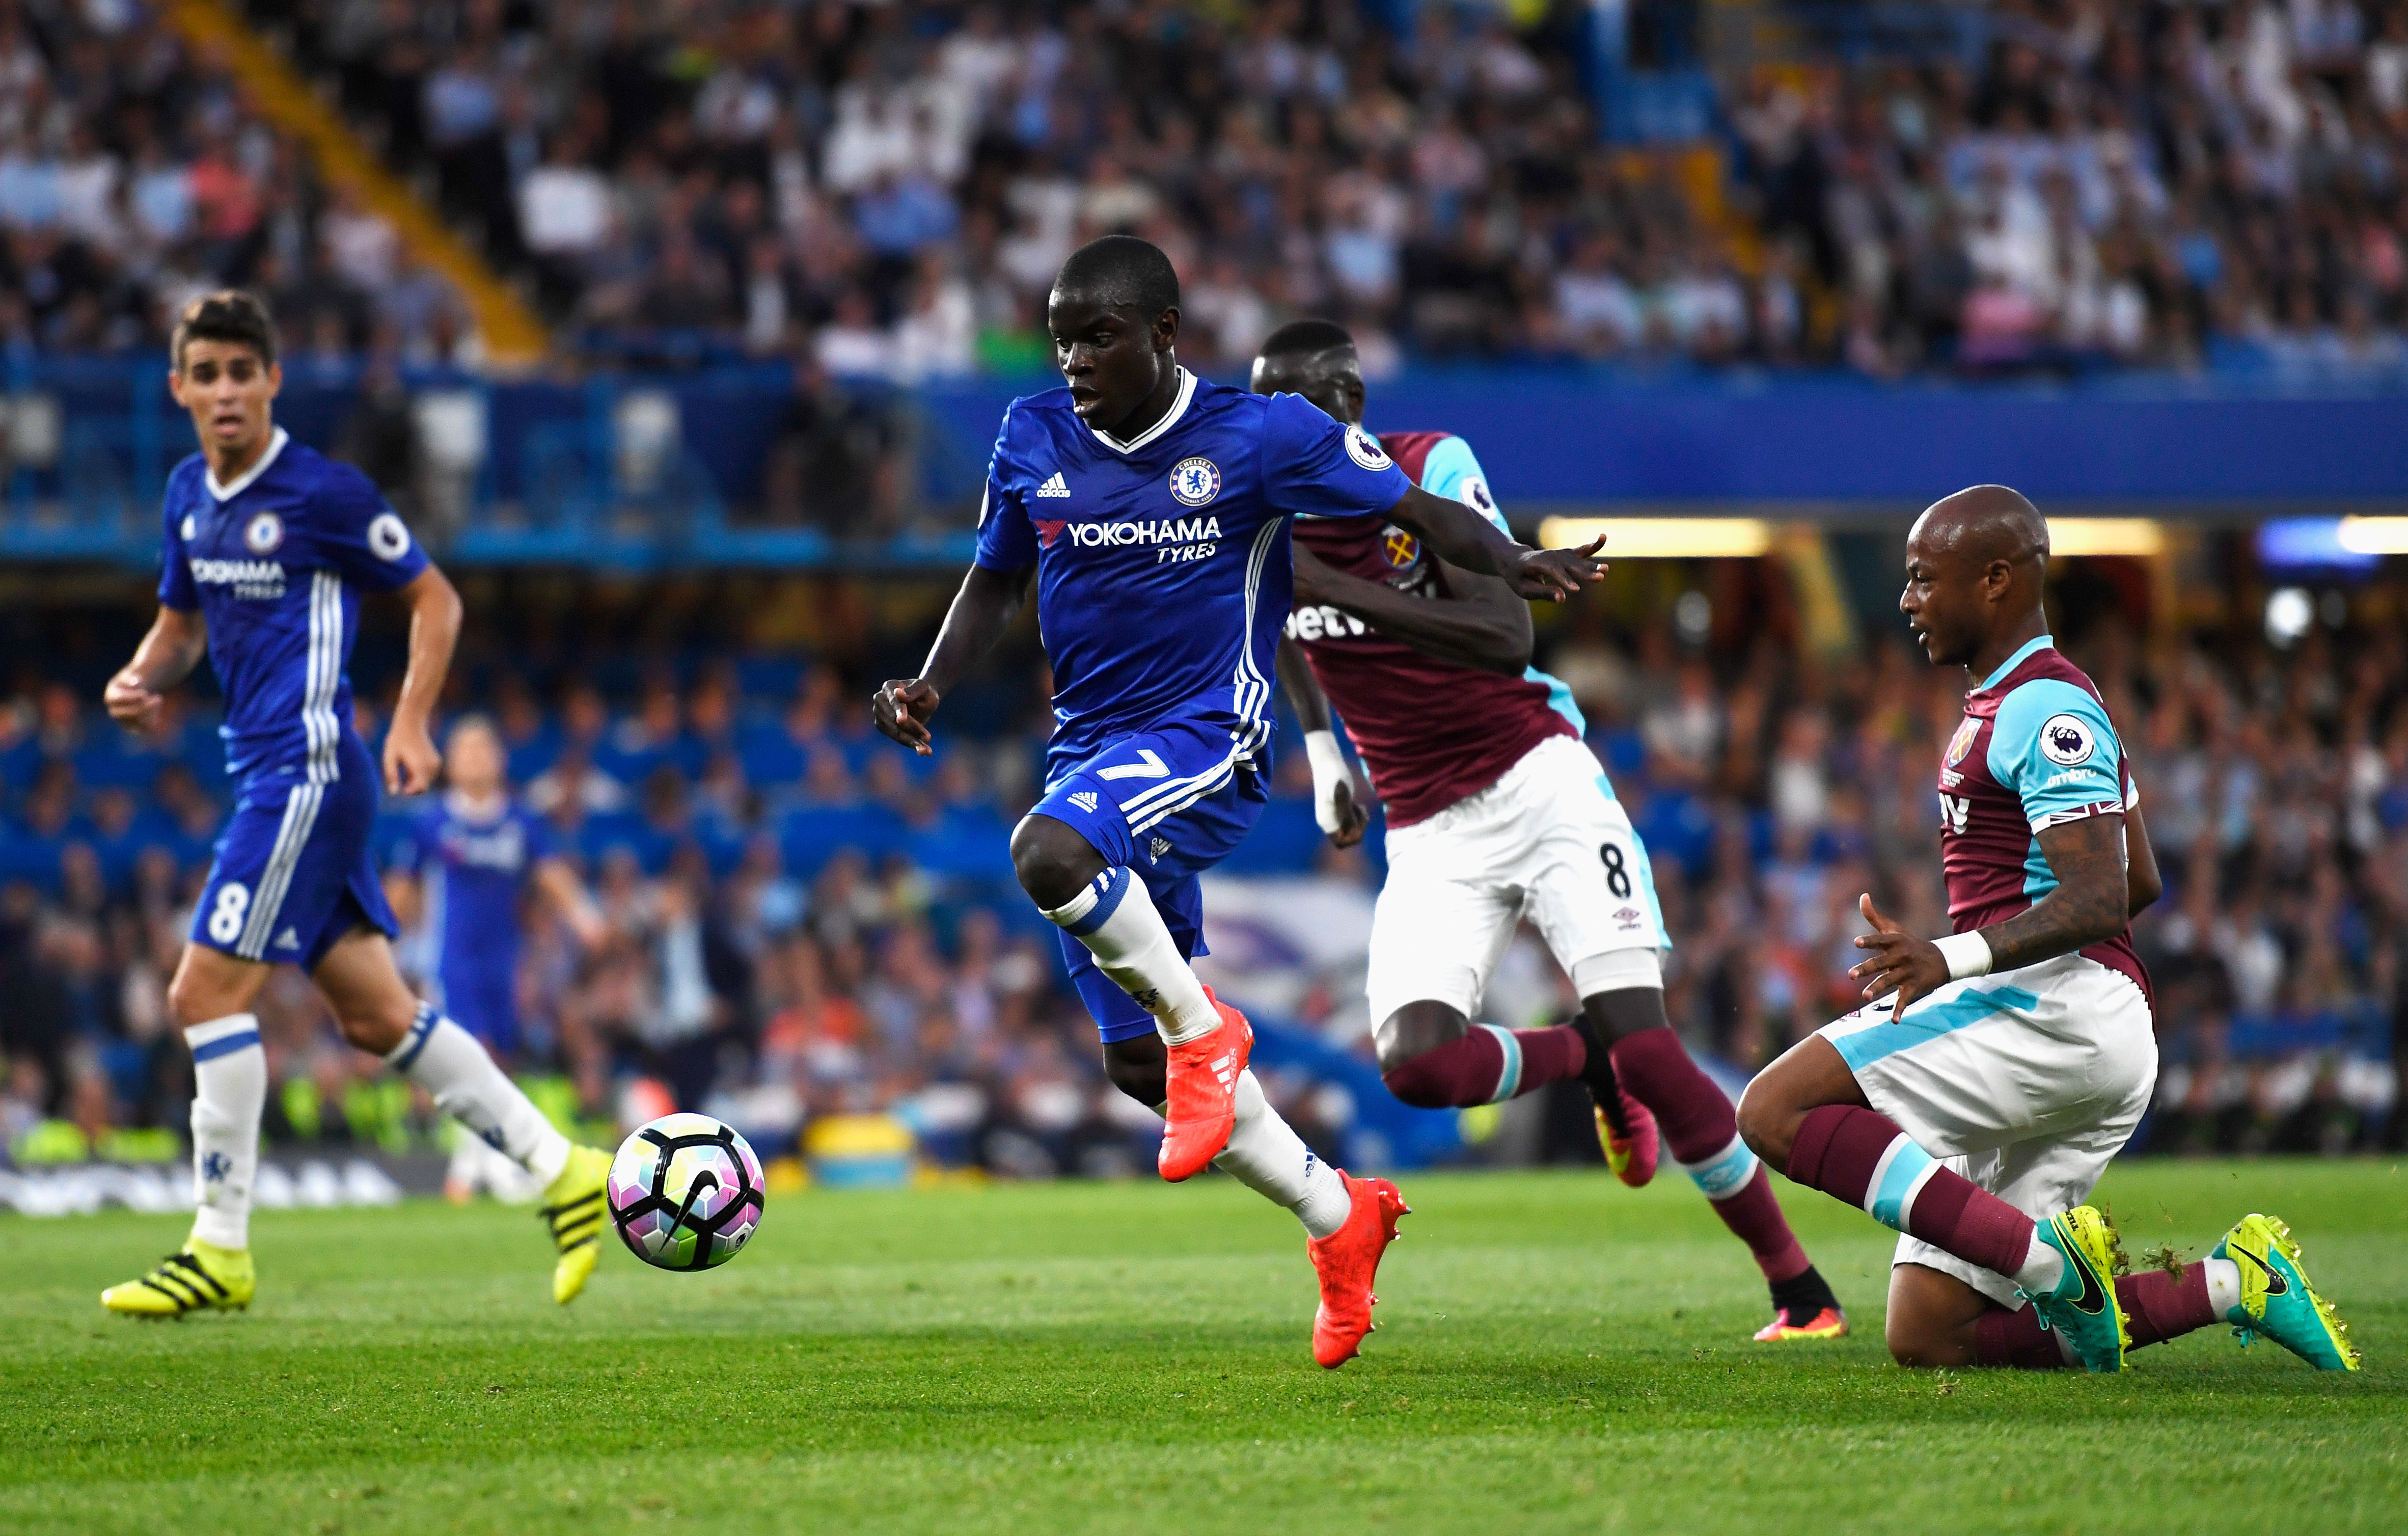 LONDON, ENGLAND - AUGUST 15: N'Golo Kante of Chelsea makes a break past Andre Ayew (R) of West Ham United during the Premier League match between Chelsea and West Ham United at Stamford Bridge on August 15, 2016 in London, England. (Photo by Mike Hewitt/Getty Images)